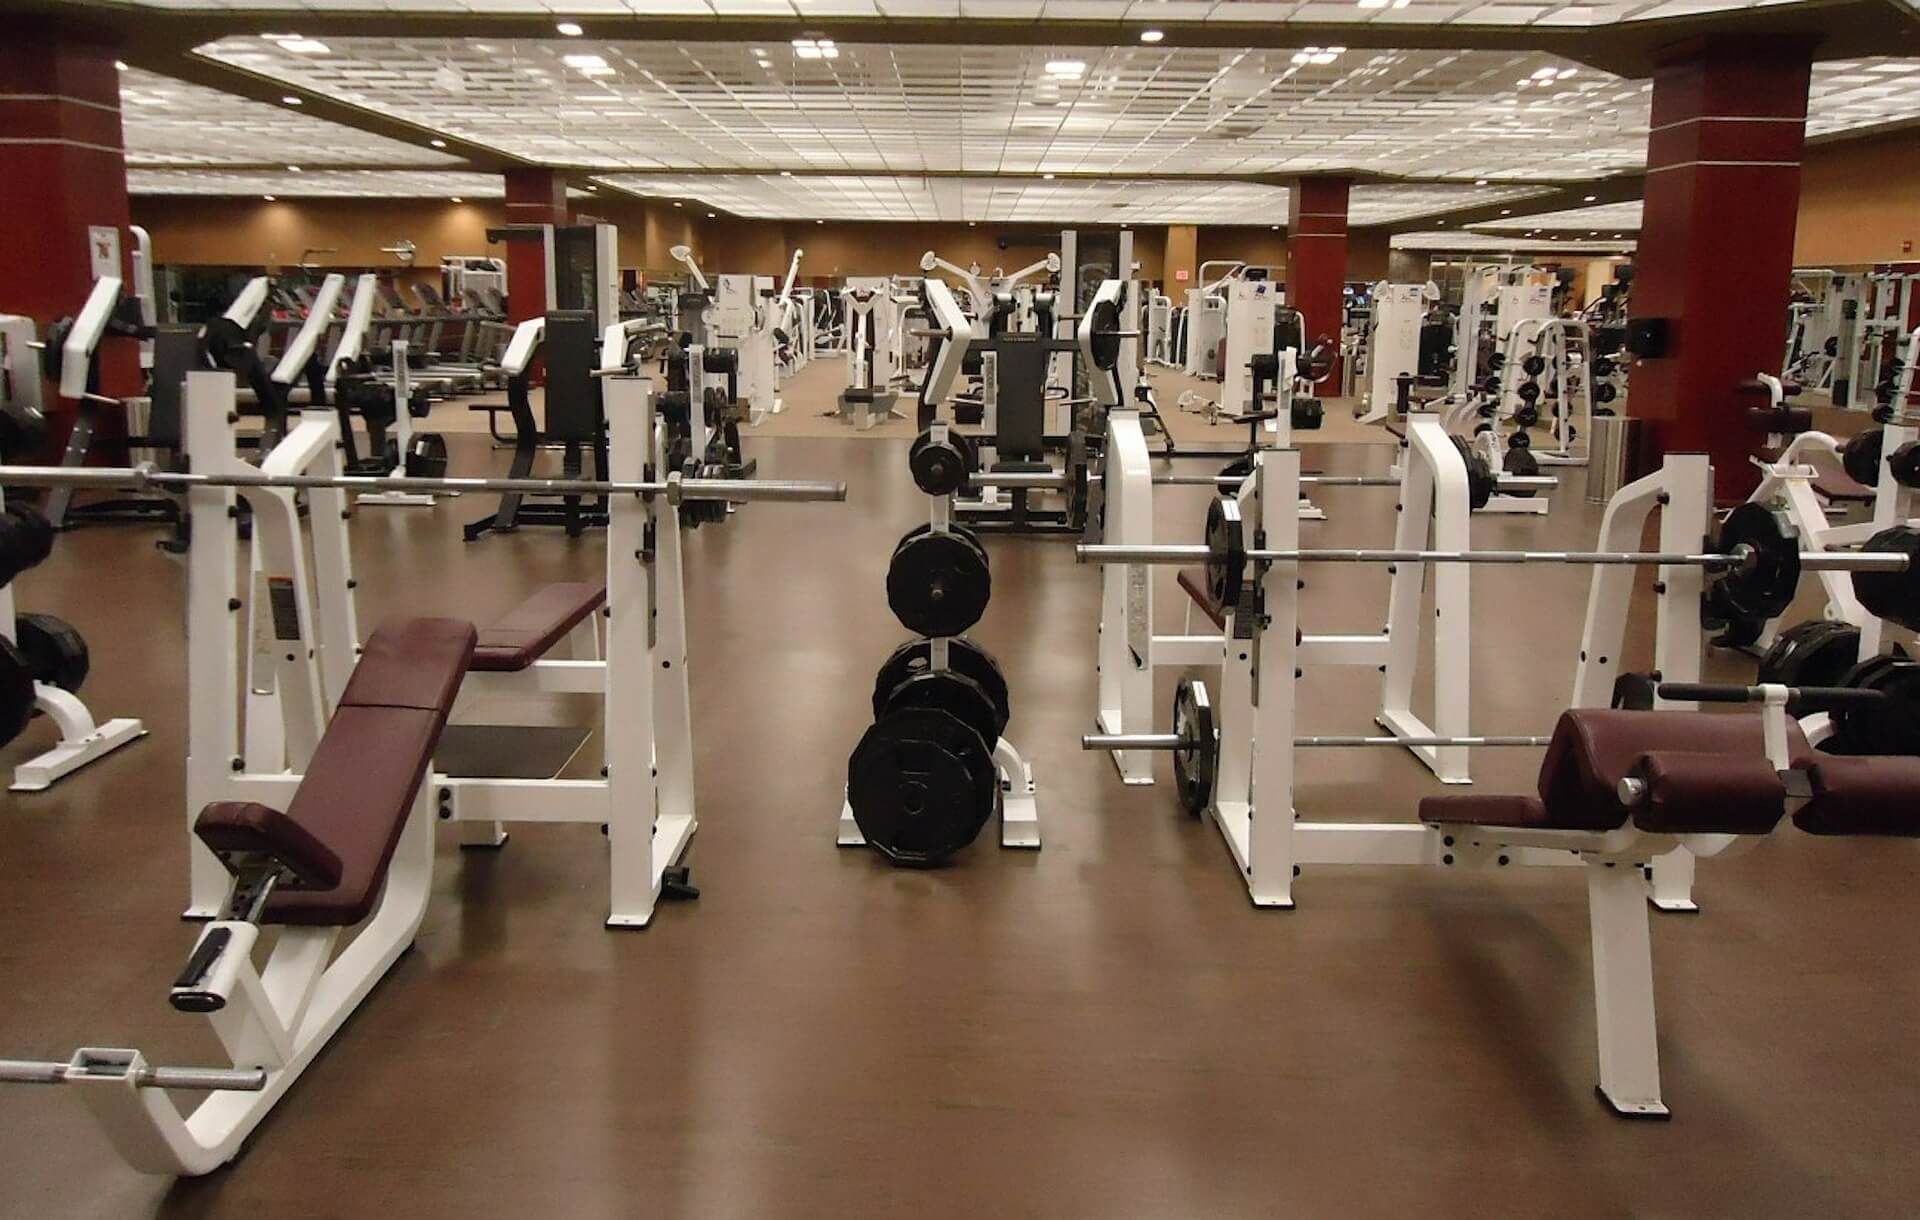 Most Important Tips and Factors to Consider When Choosing Gym